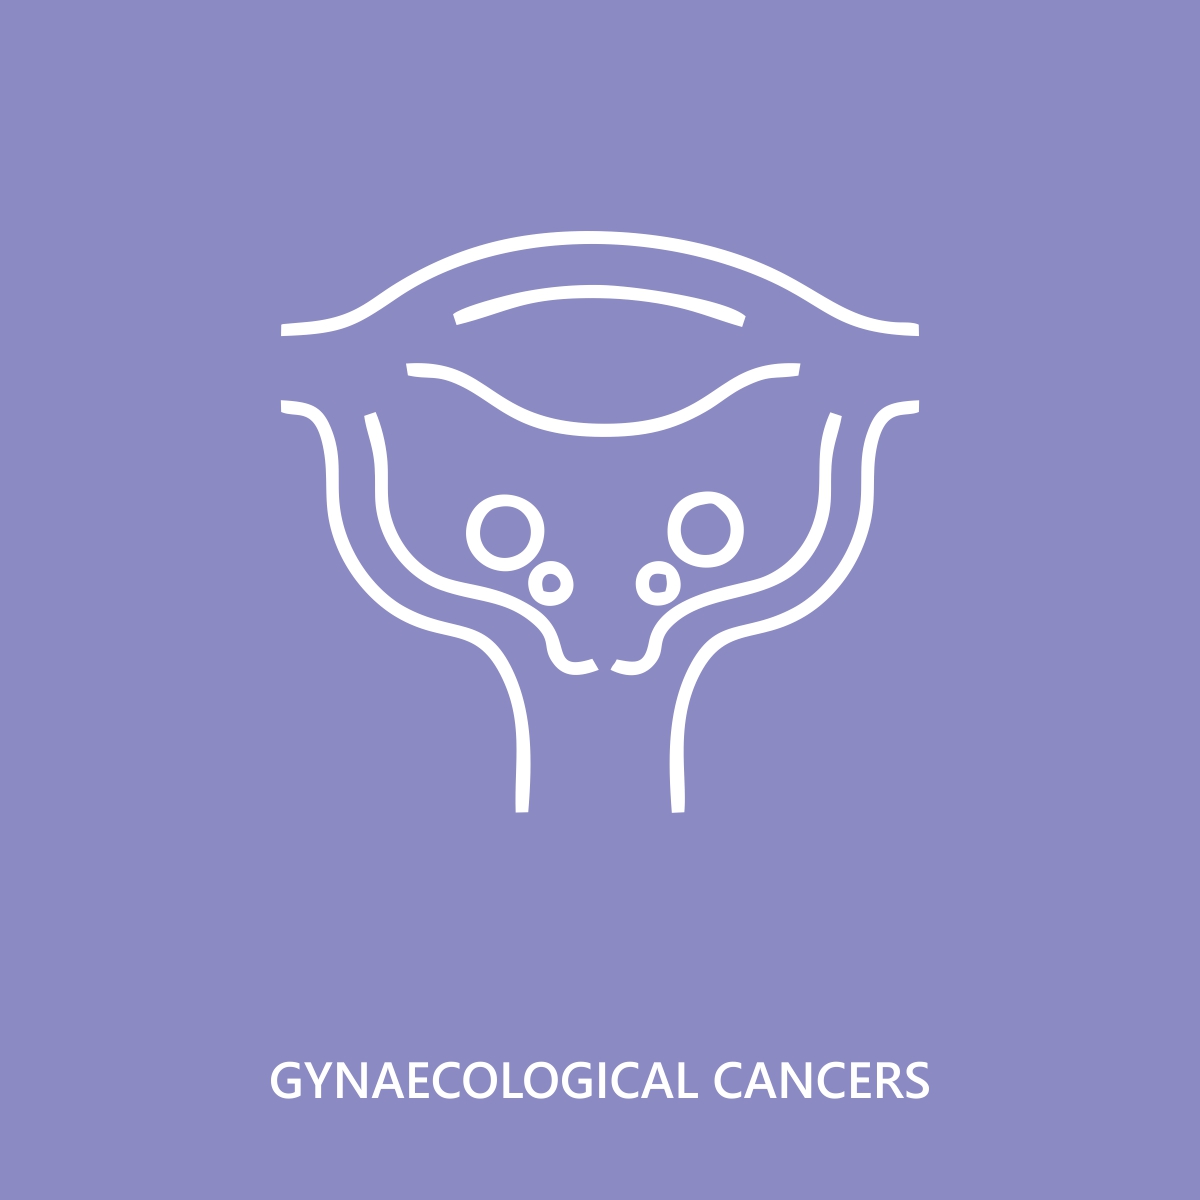 GYNAECOLOGICAL CANCERS Image